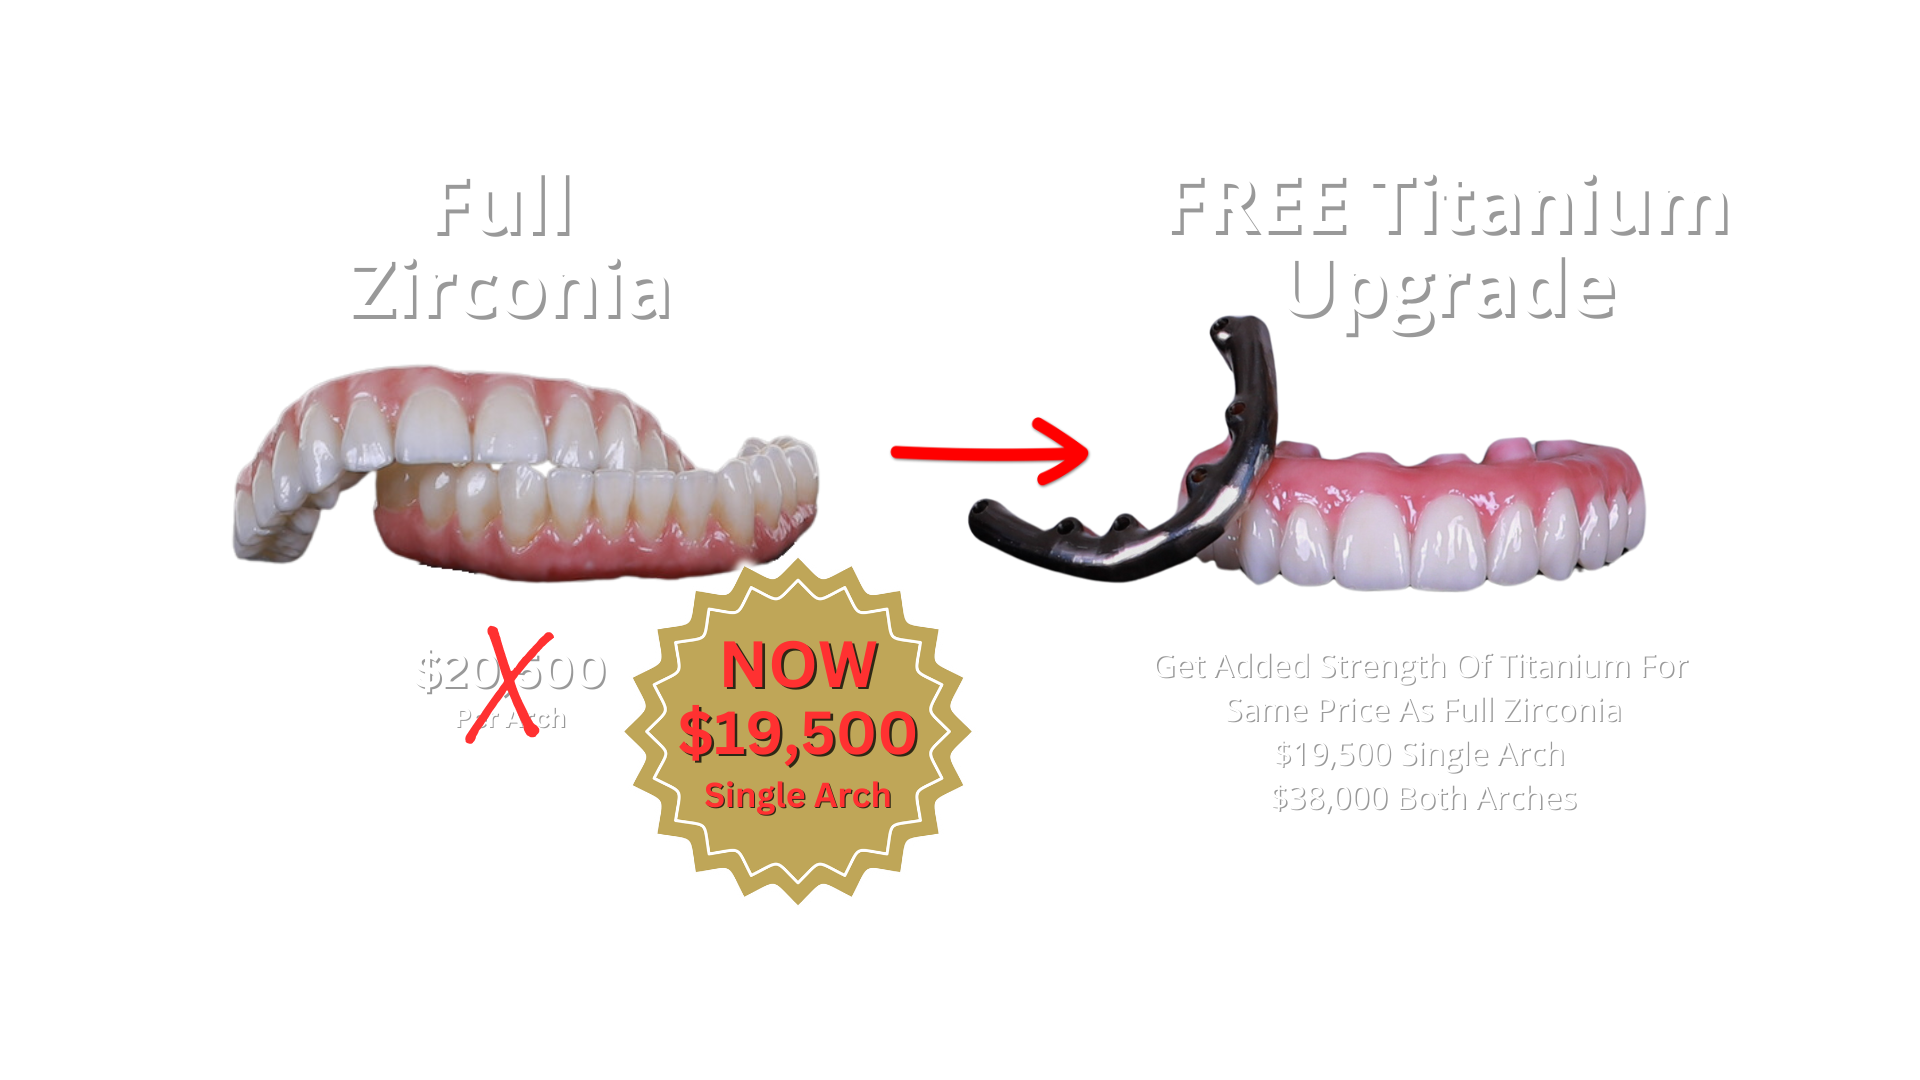 Dental implant arch comparison showing zirconia and zirconia with titanium bar.